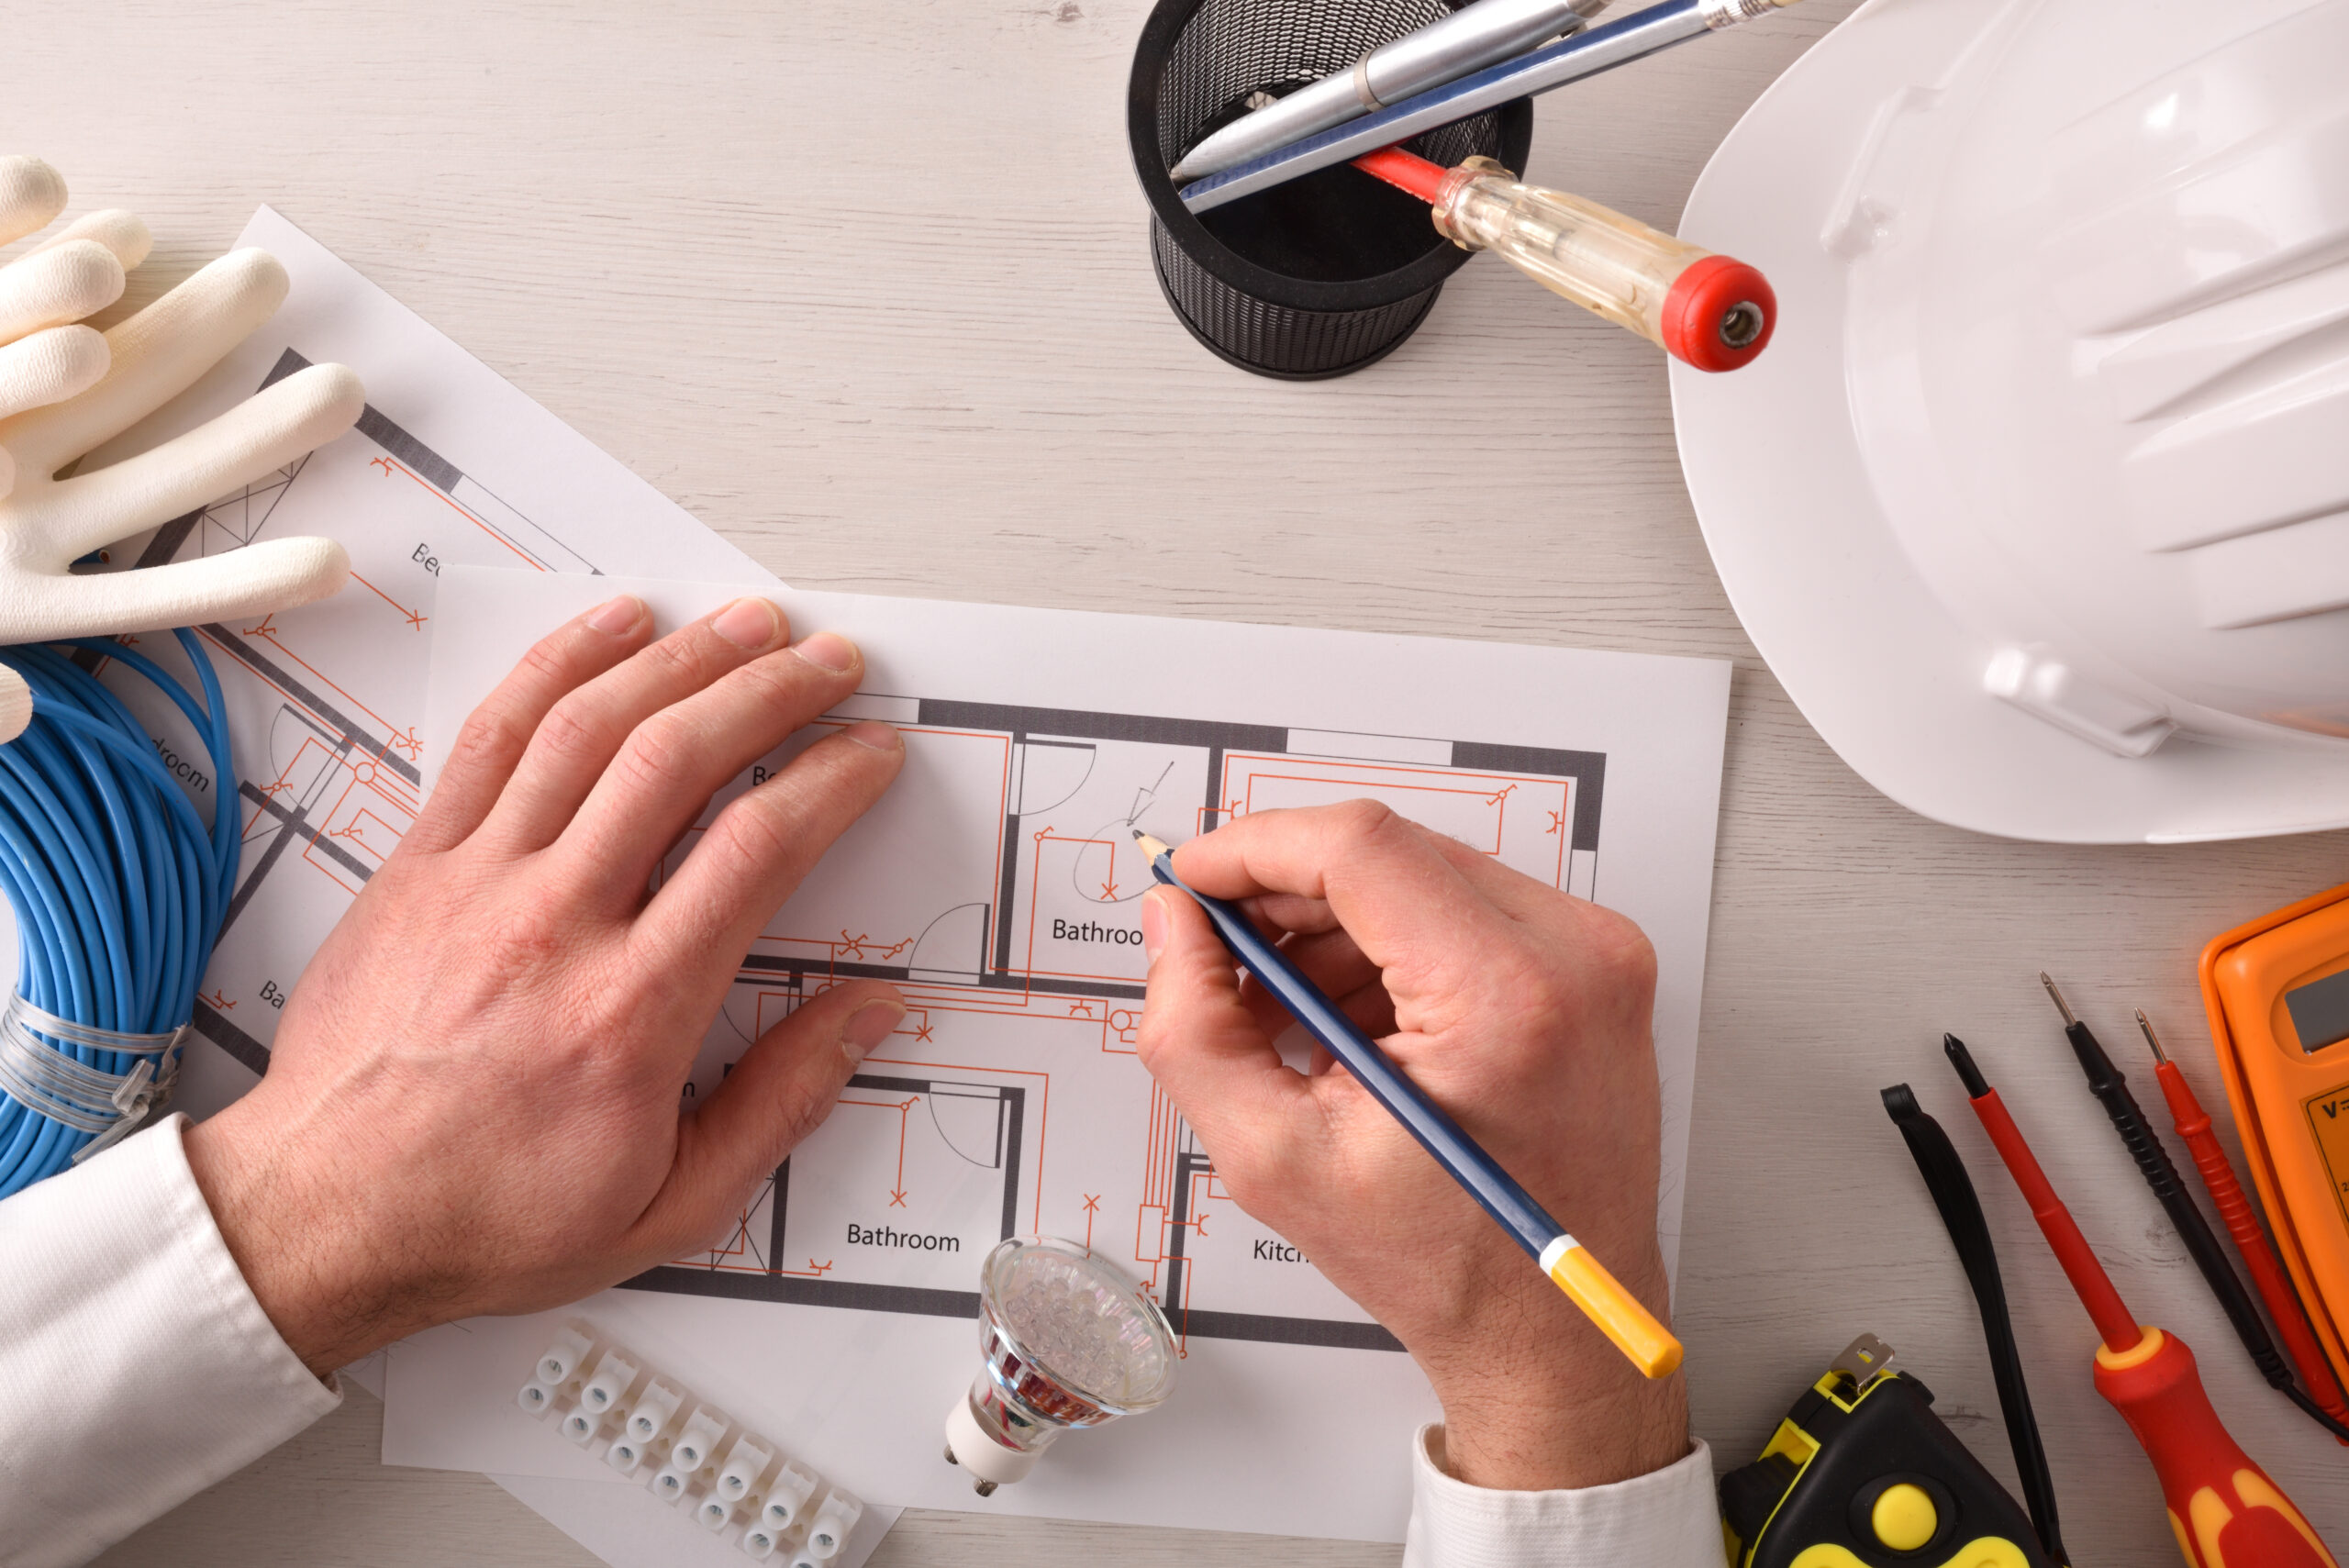 Technical engineer in electricity writing in an electrical diagram of housing installation on the desk with tools around. Horizontal composition. Top view.